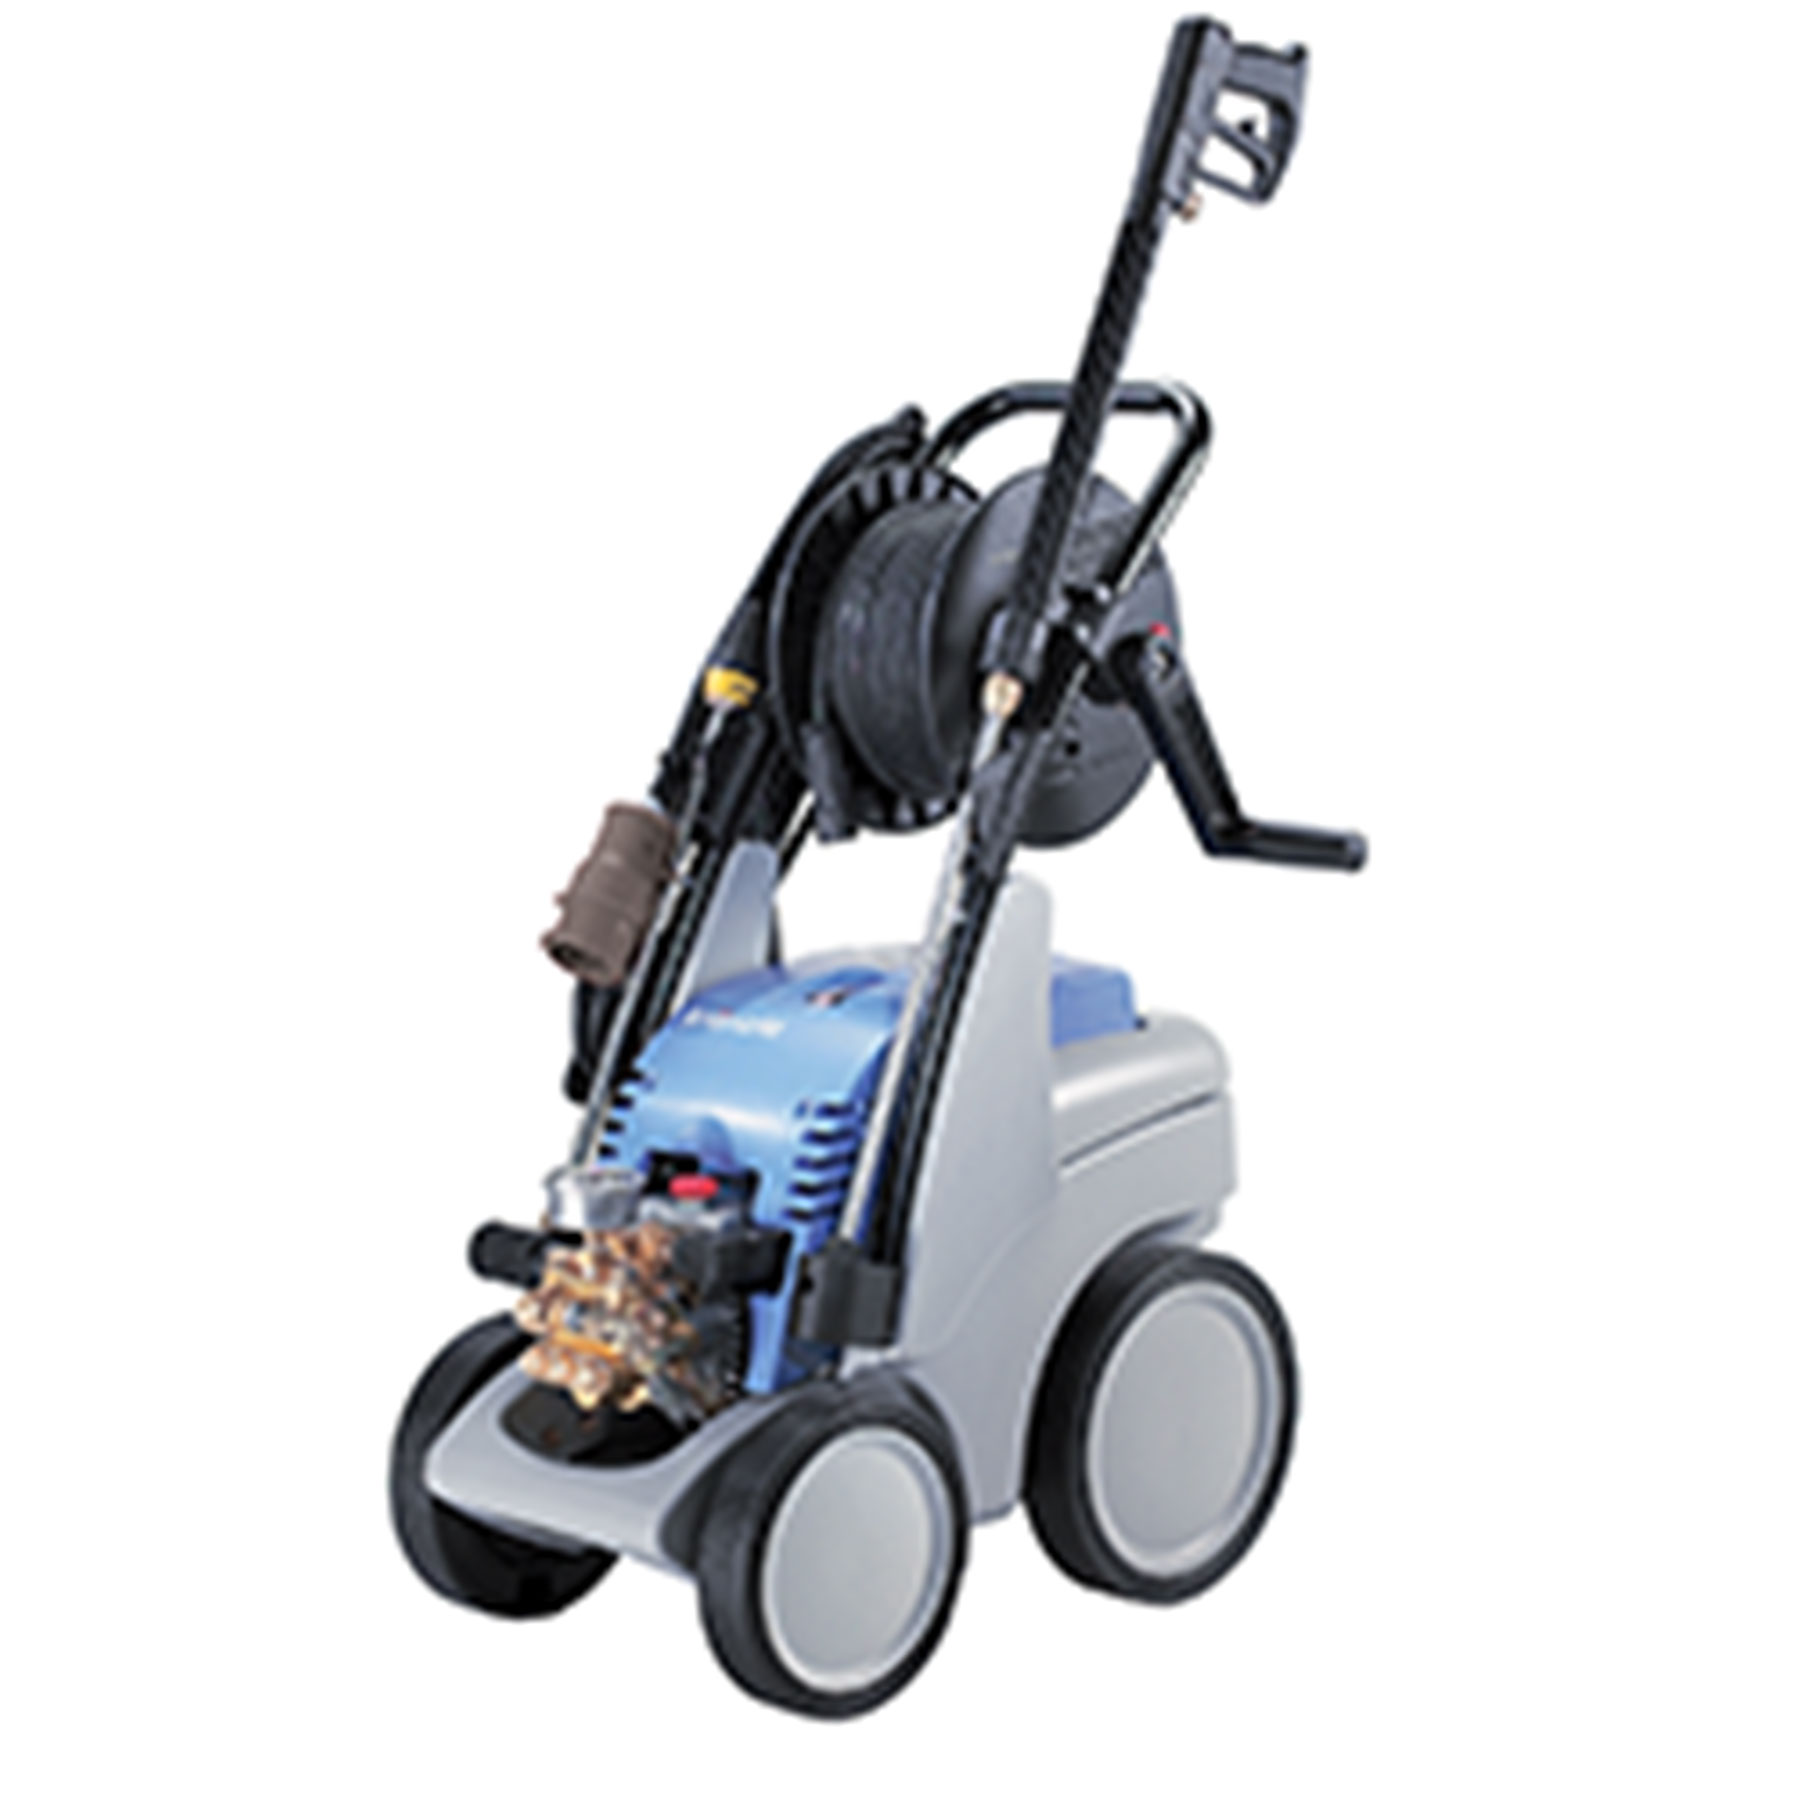 K499tst Pressure Washer, Cold Water, 110v, 20a, Gfi